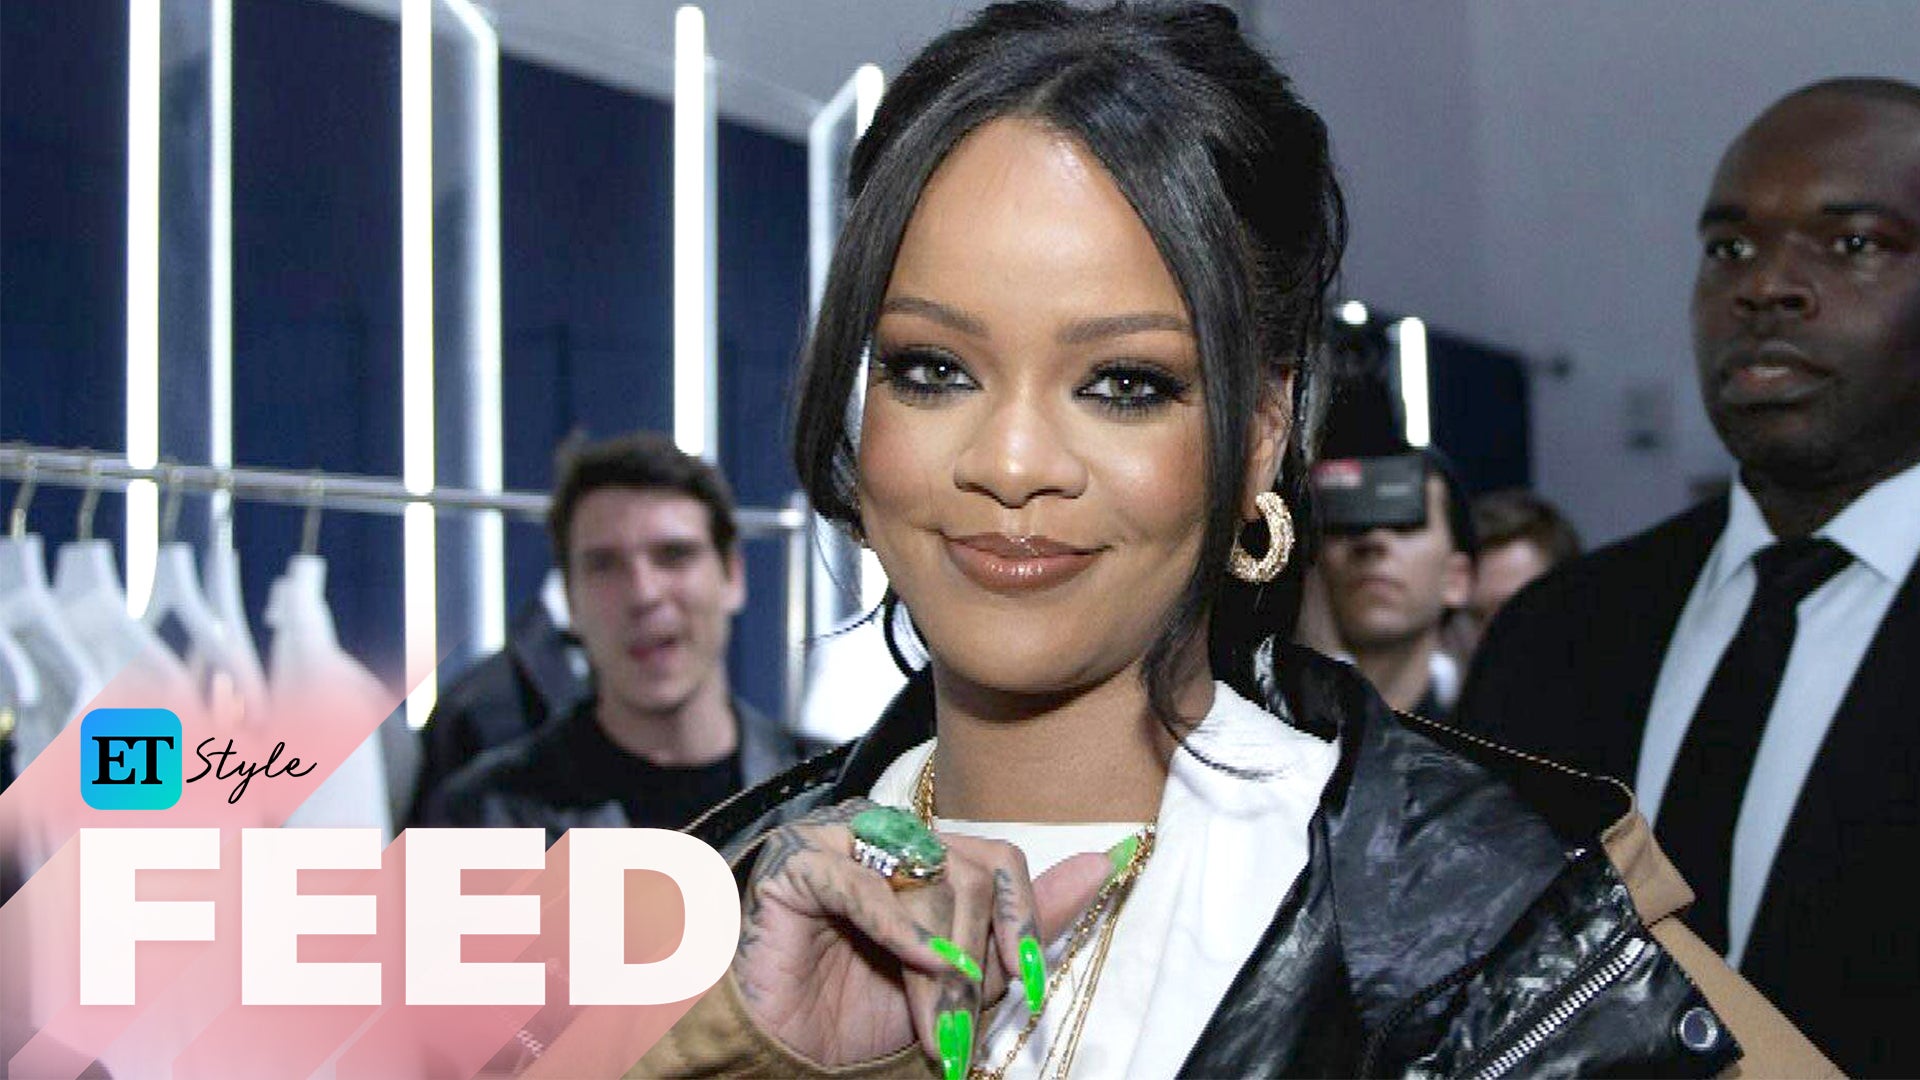 Could a New Rihanna Fashion Line Change Fashion Forever?